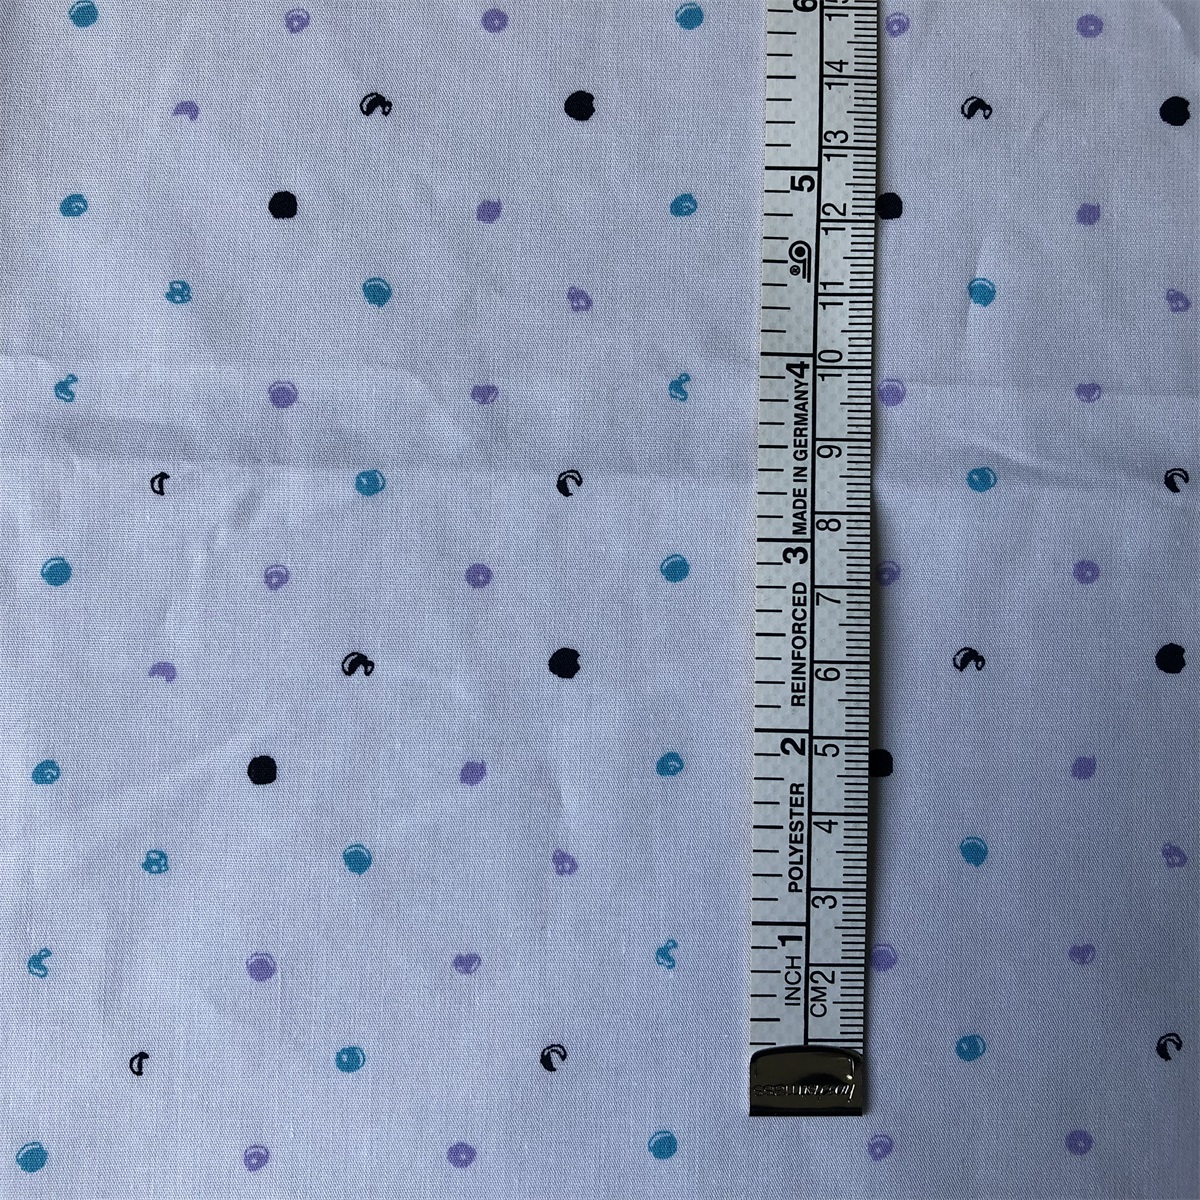 Sun-rising Textile Cotton Printed fabric high quality Eco-friendly 100% cotton poplin printed woven fabric for men's shirts